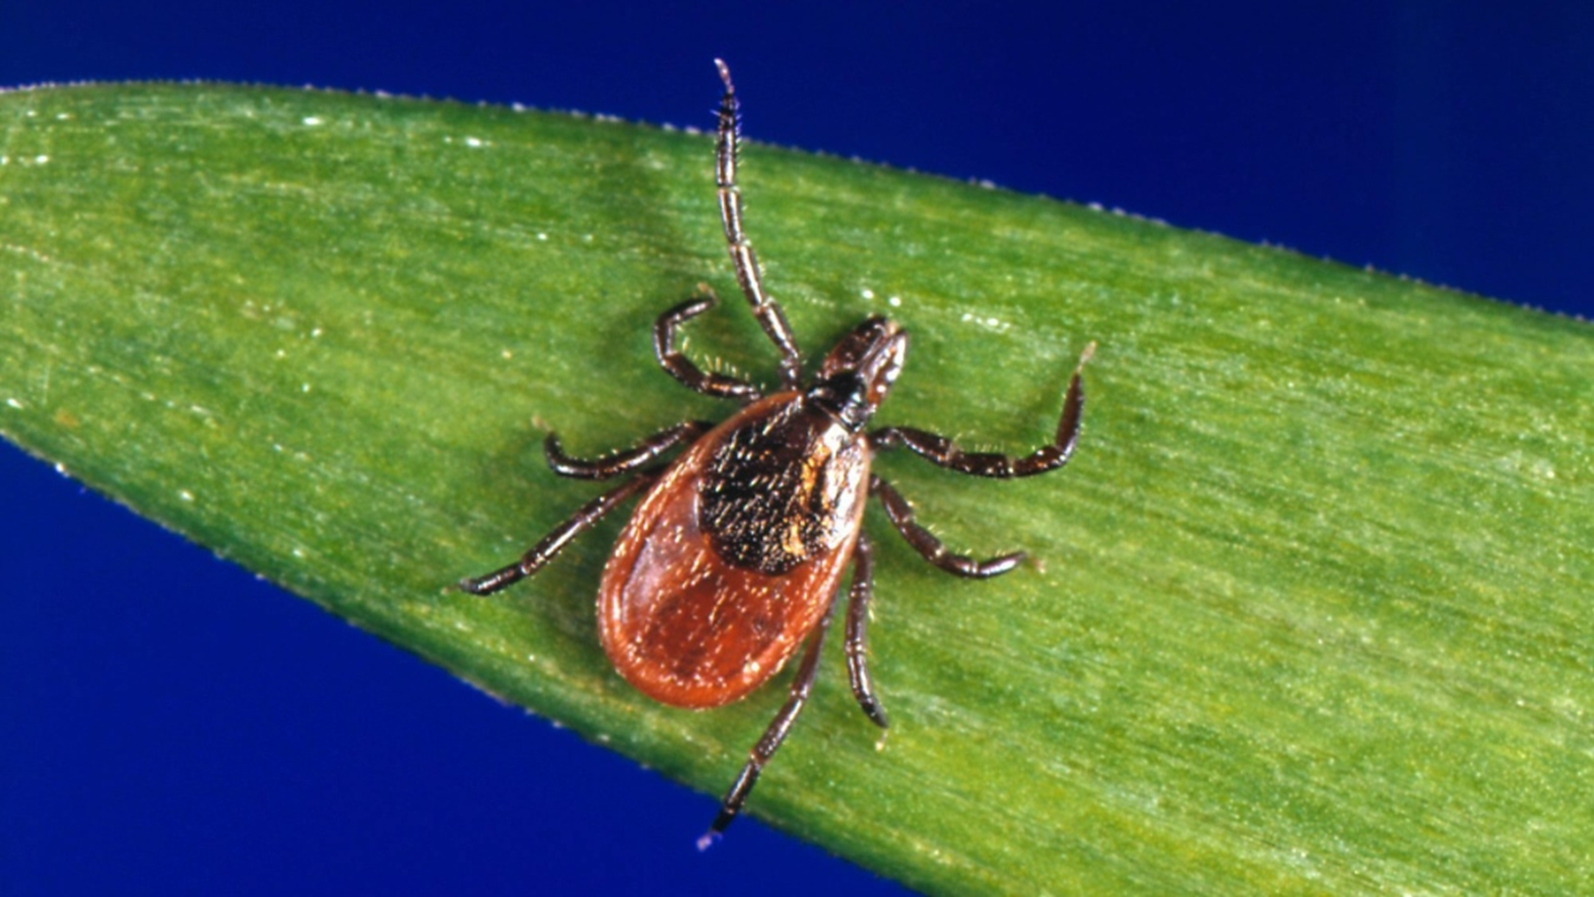 How rare are ticks in Montreal?